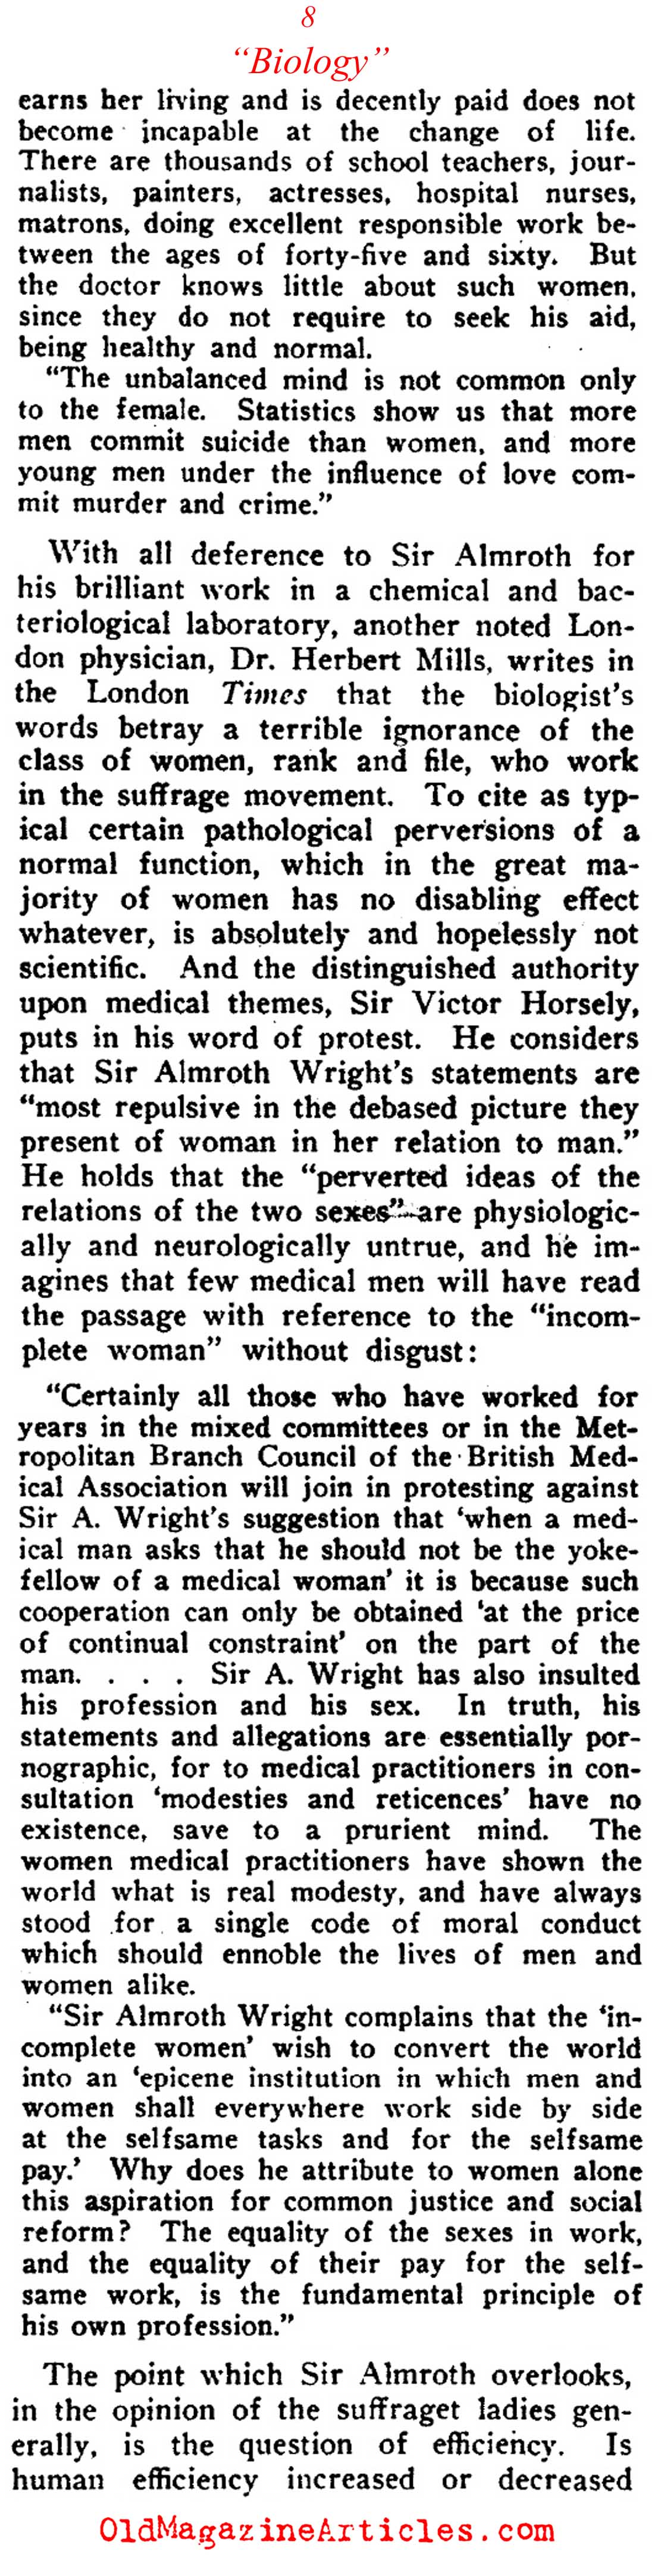 Scientific Proof  That Women Should Not Be Allowed to Vote (Current Opinion, 1912)